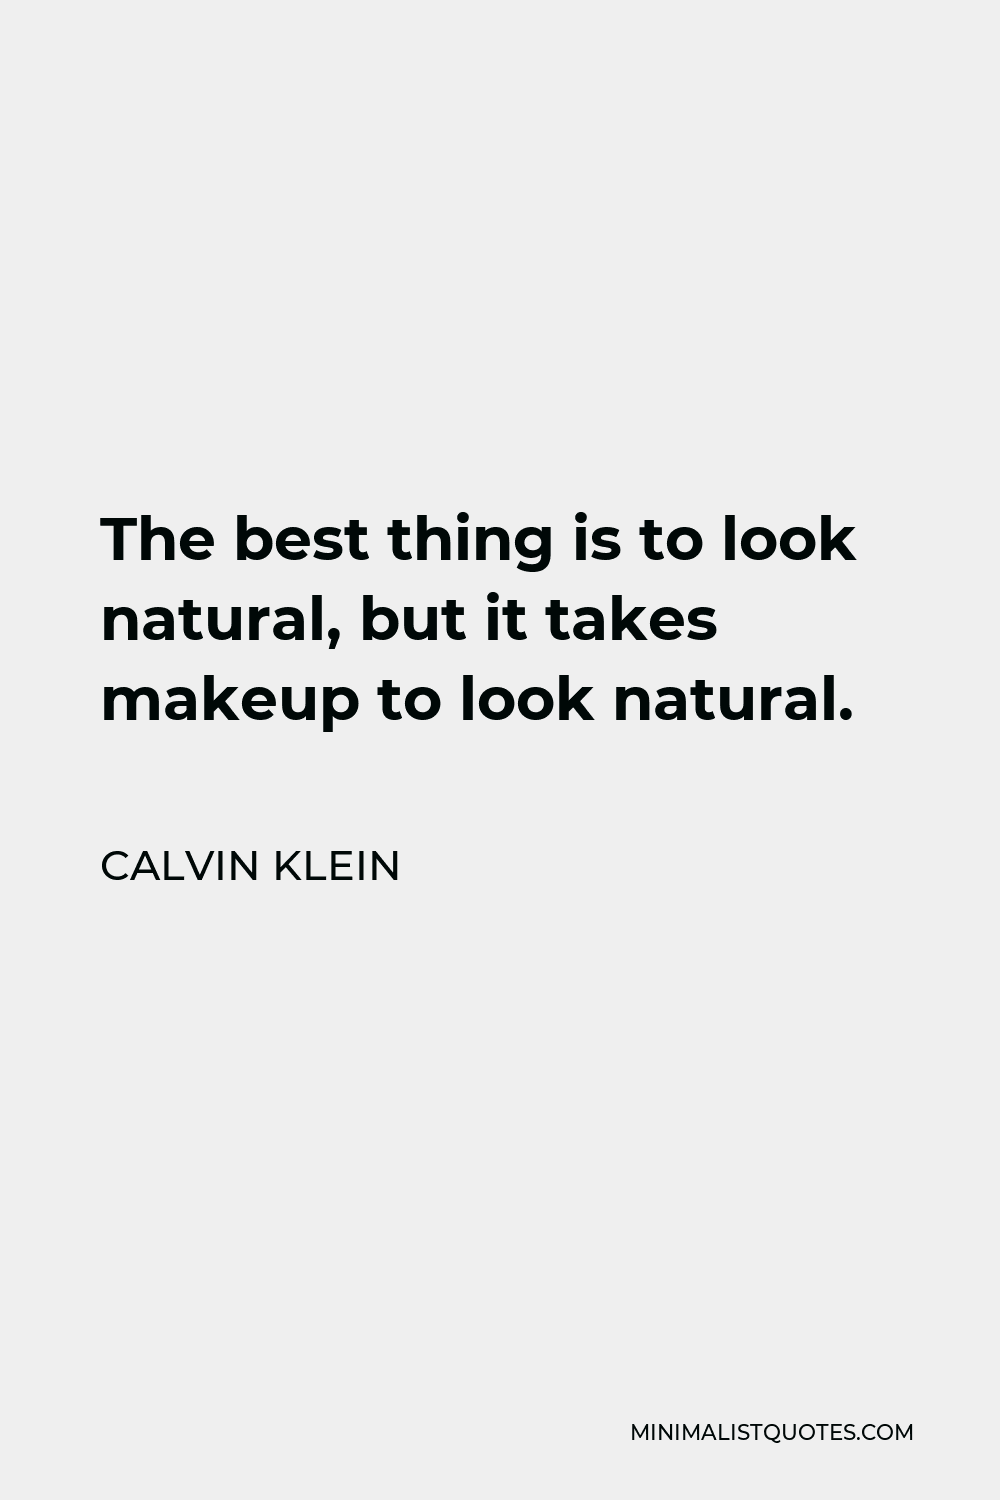 Calvin Klein Quote: The best thing is to look natural, but it takes makeup  to look natural.